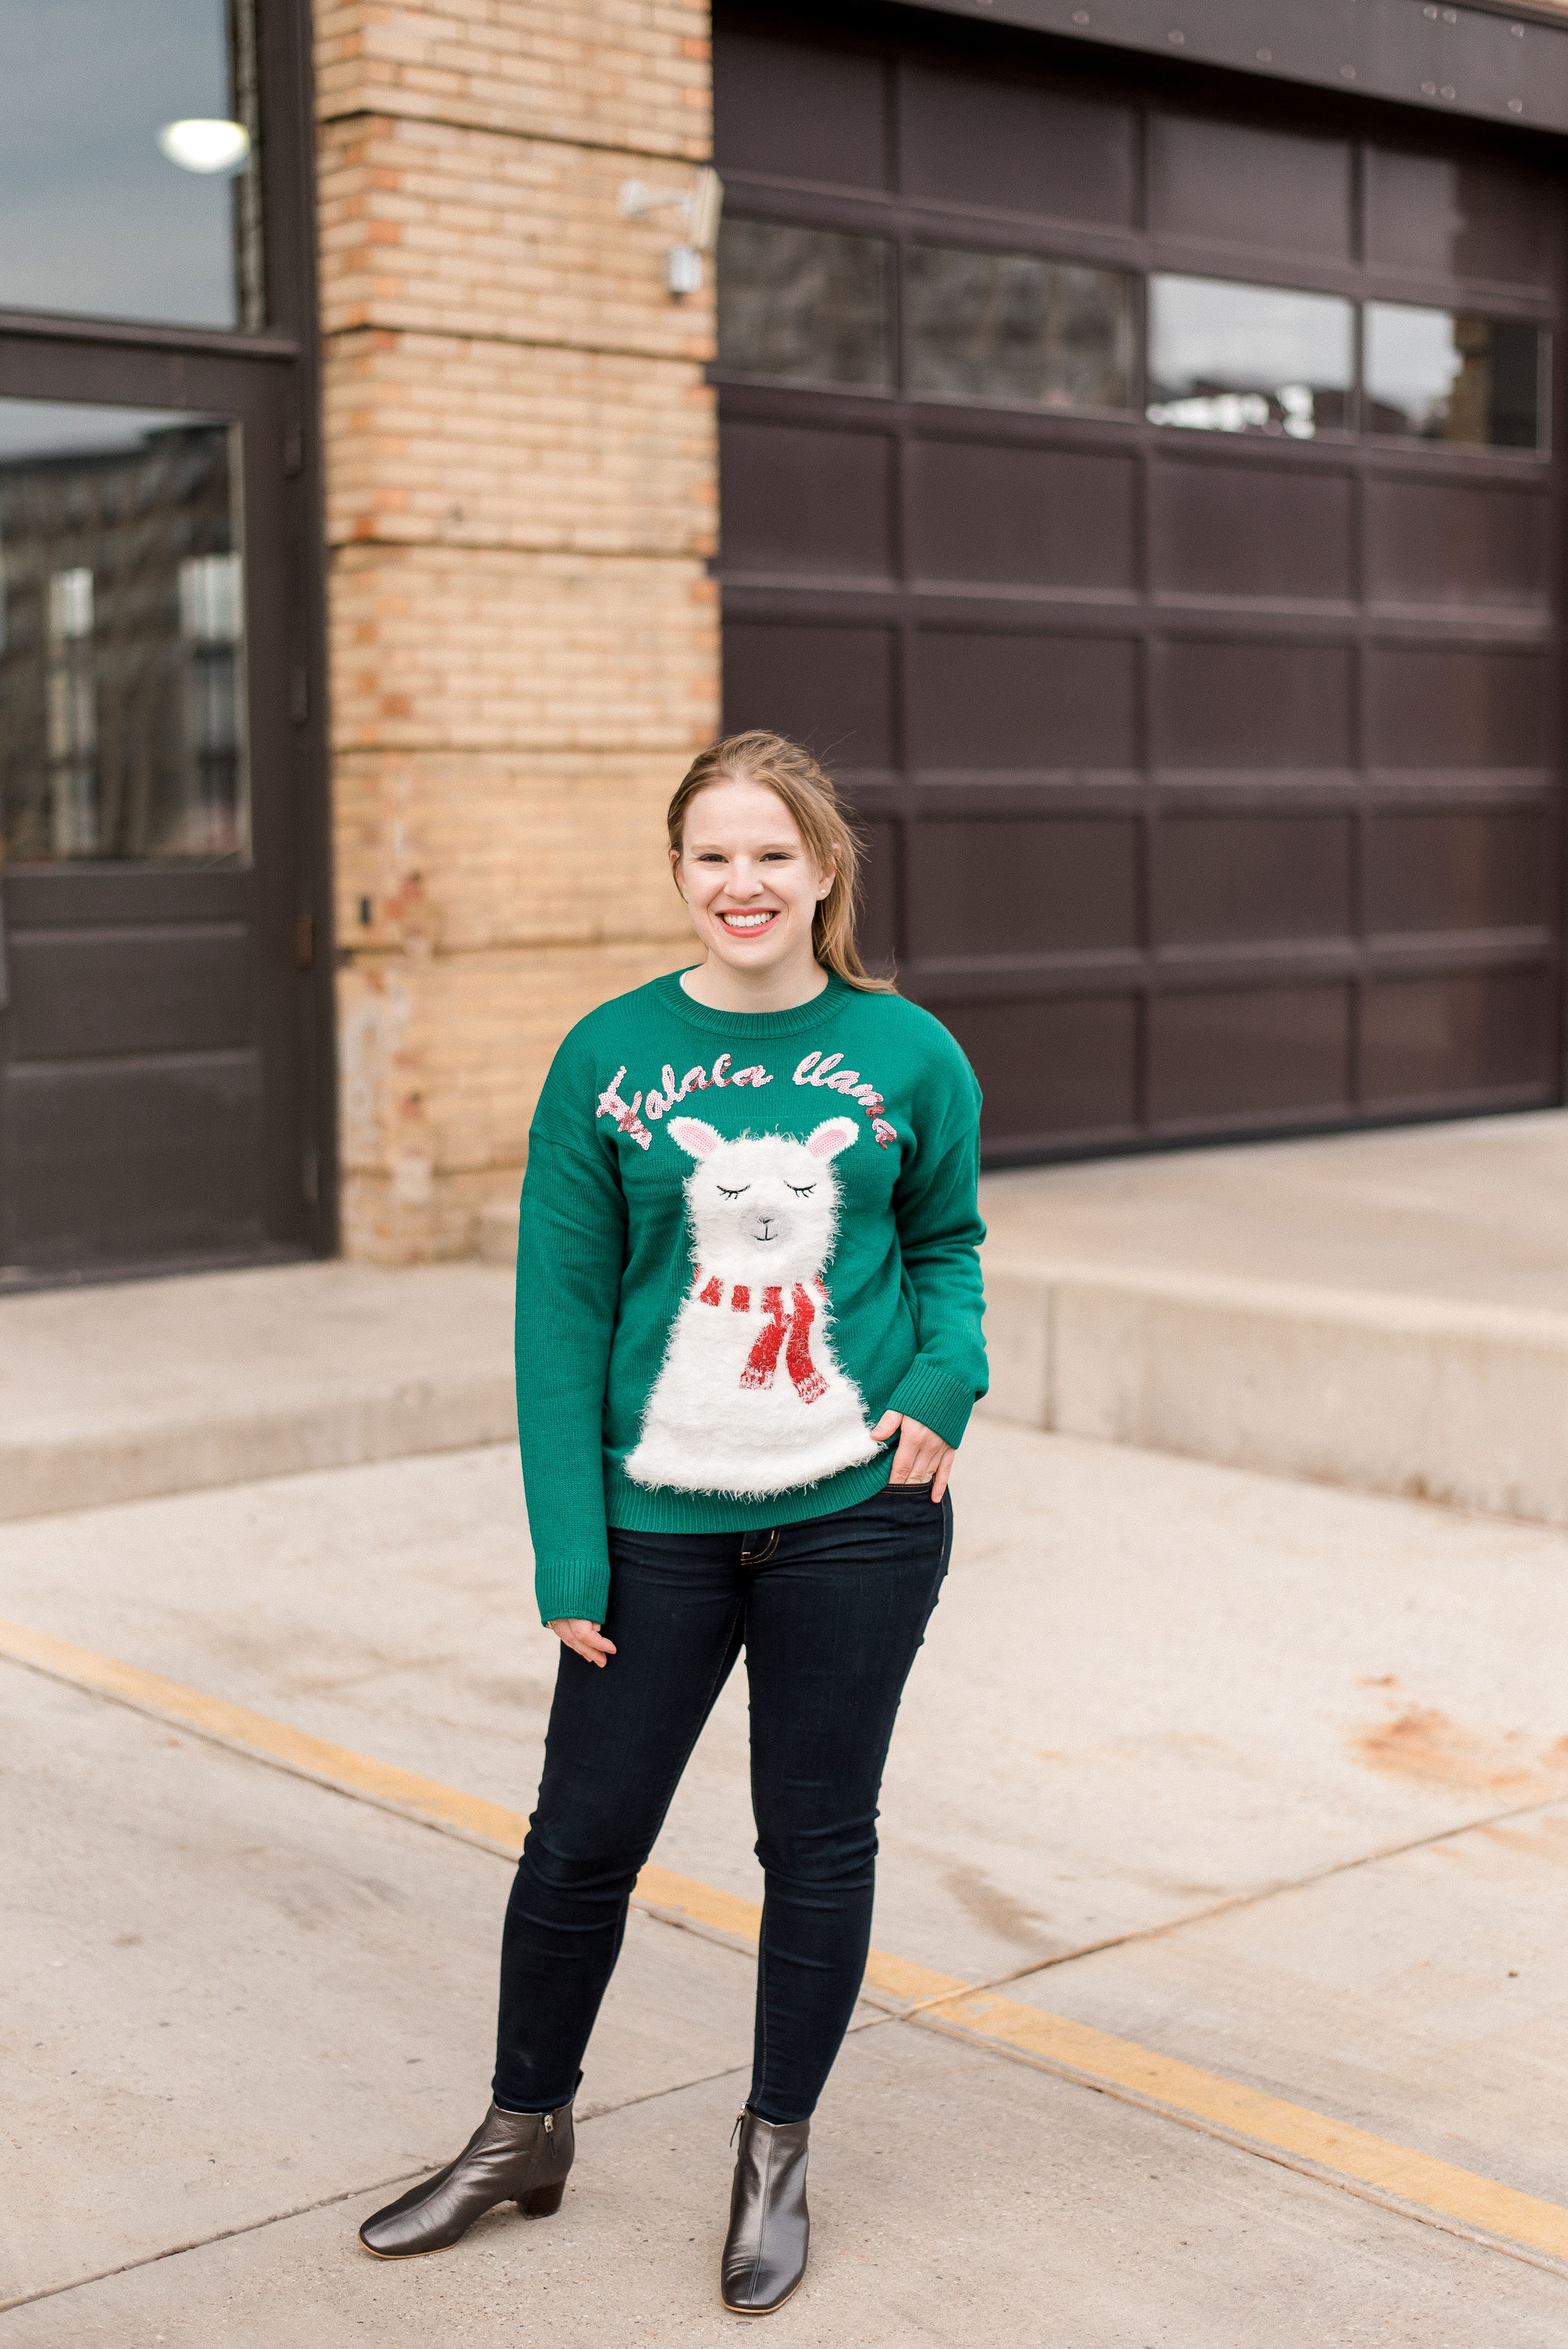 DC woman blogger wearing New Look christmas sweater with llama print in green